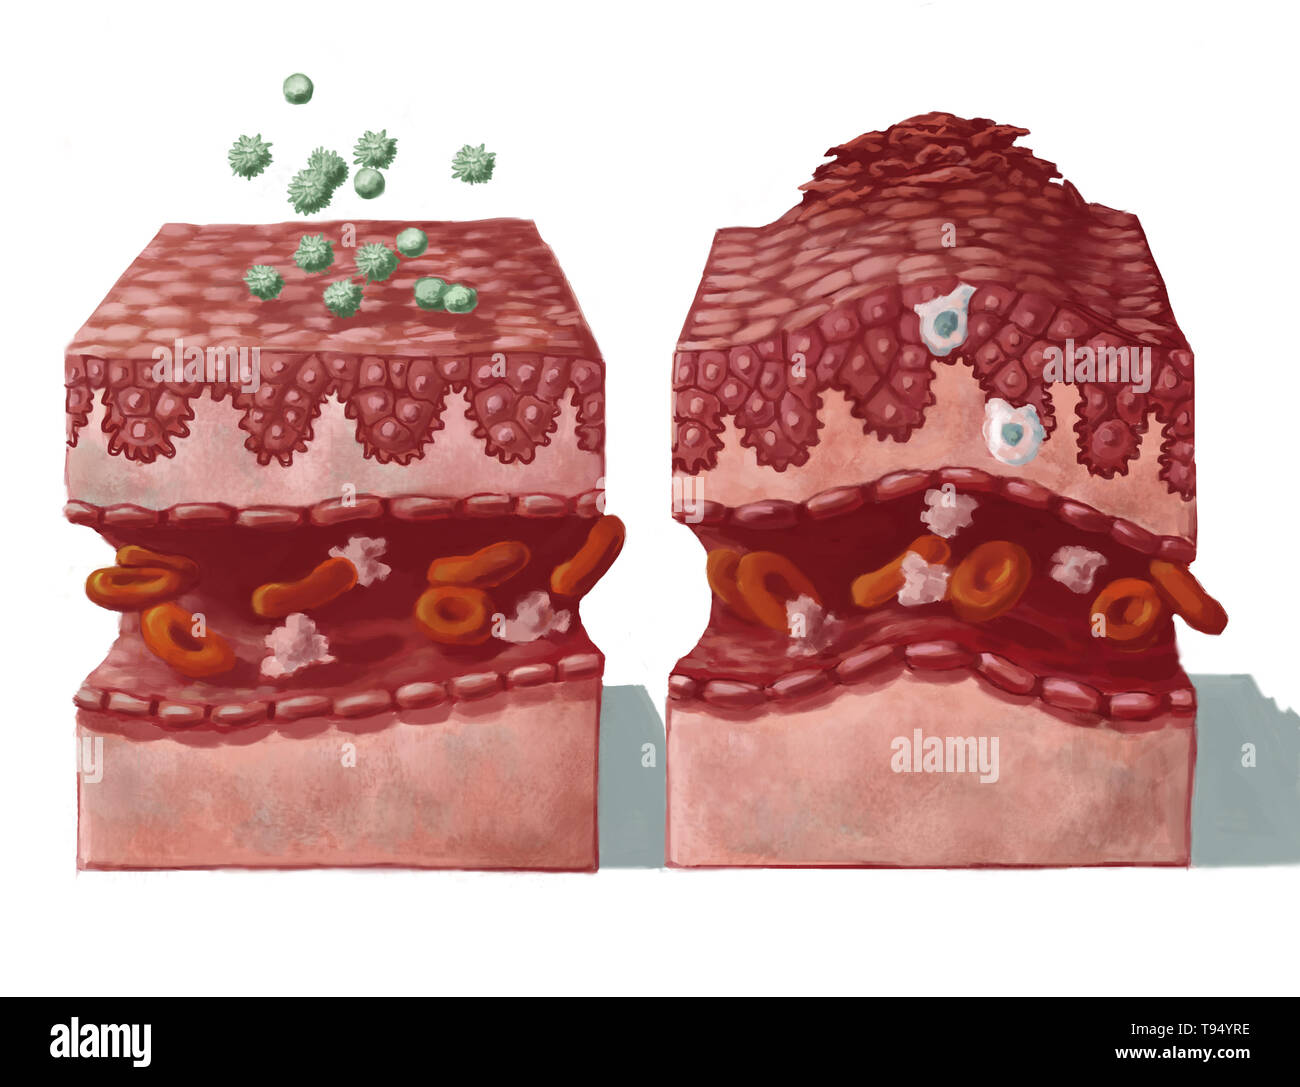 Illustration of healthy skin coming into contact with allergens (on the left) and the reaction that follows infection (on the right): dilation of blood vessels and the immune reaction of macrophages and lymphocytes that migrate to the inflammation, followed by the epidermis swelling (edema) and shedding of the upper epithelial cells. Stock Photo